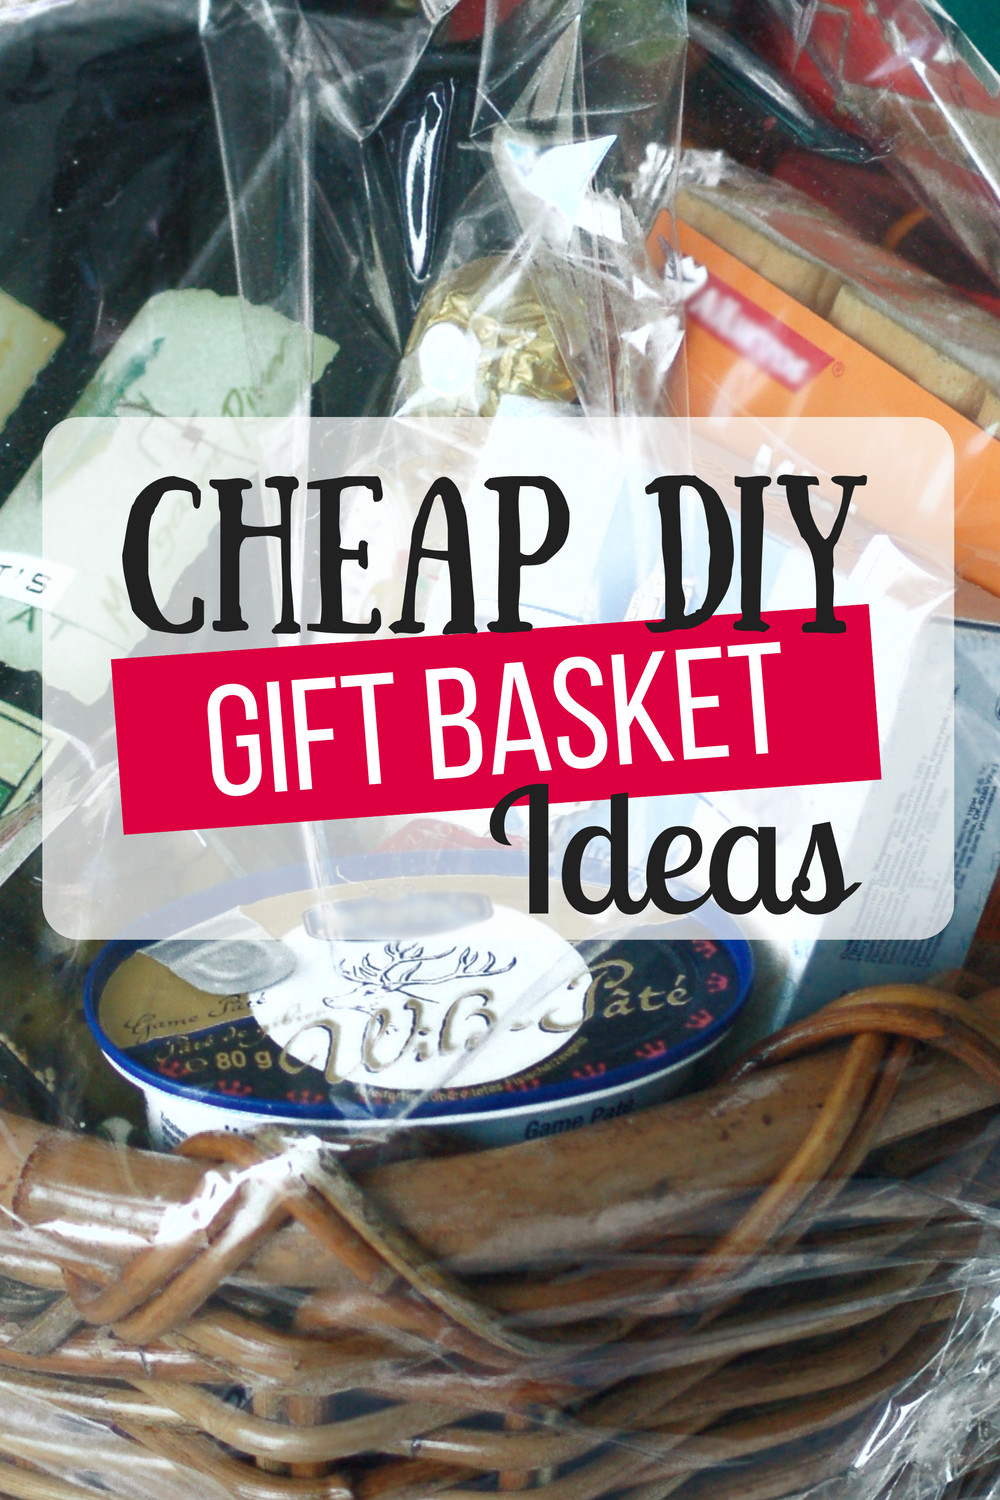 Inexpensive Gift Baskets Ideas
 Cheap DIY Gift Baskets The Busy Bud er